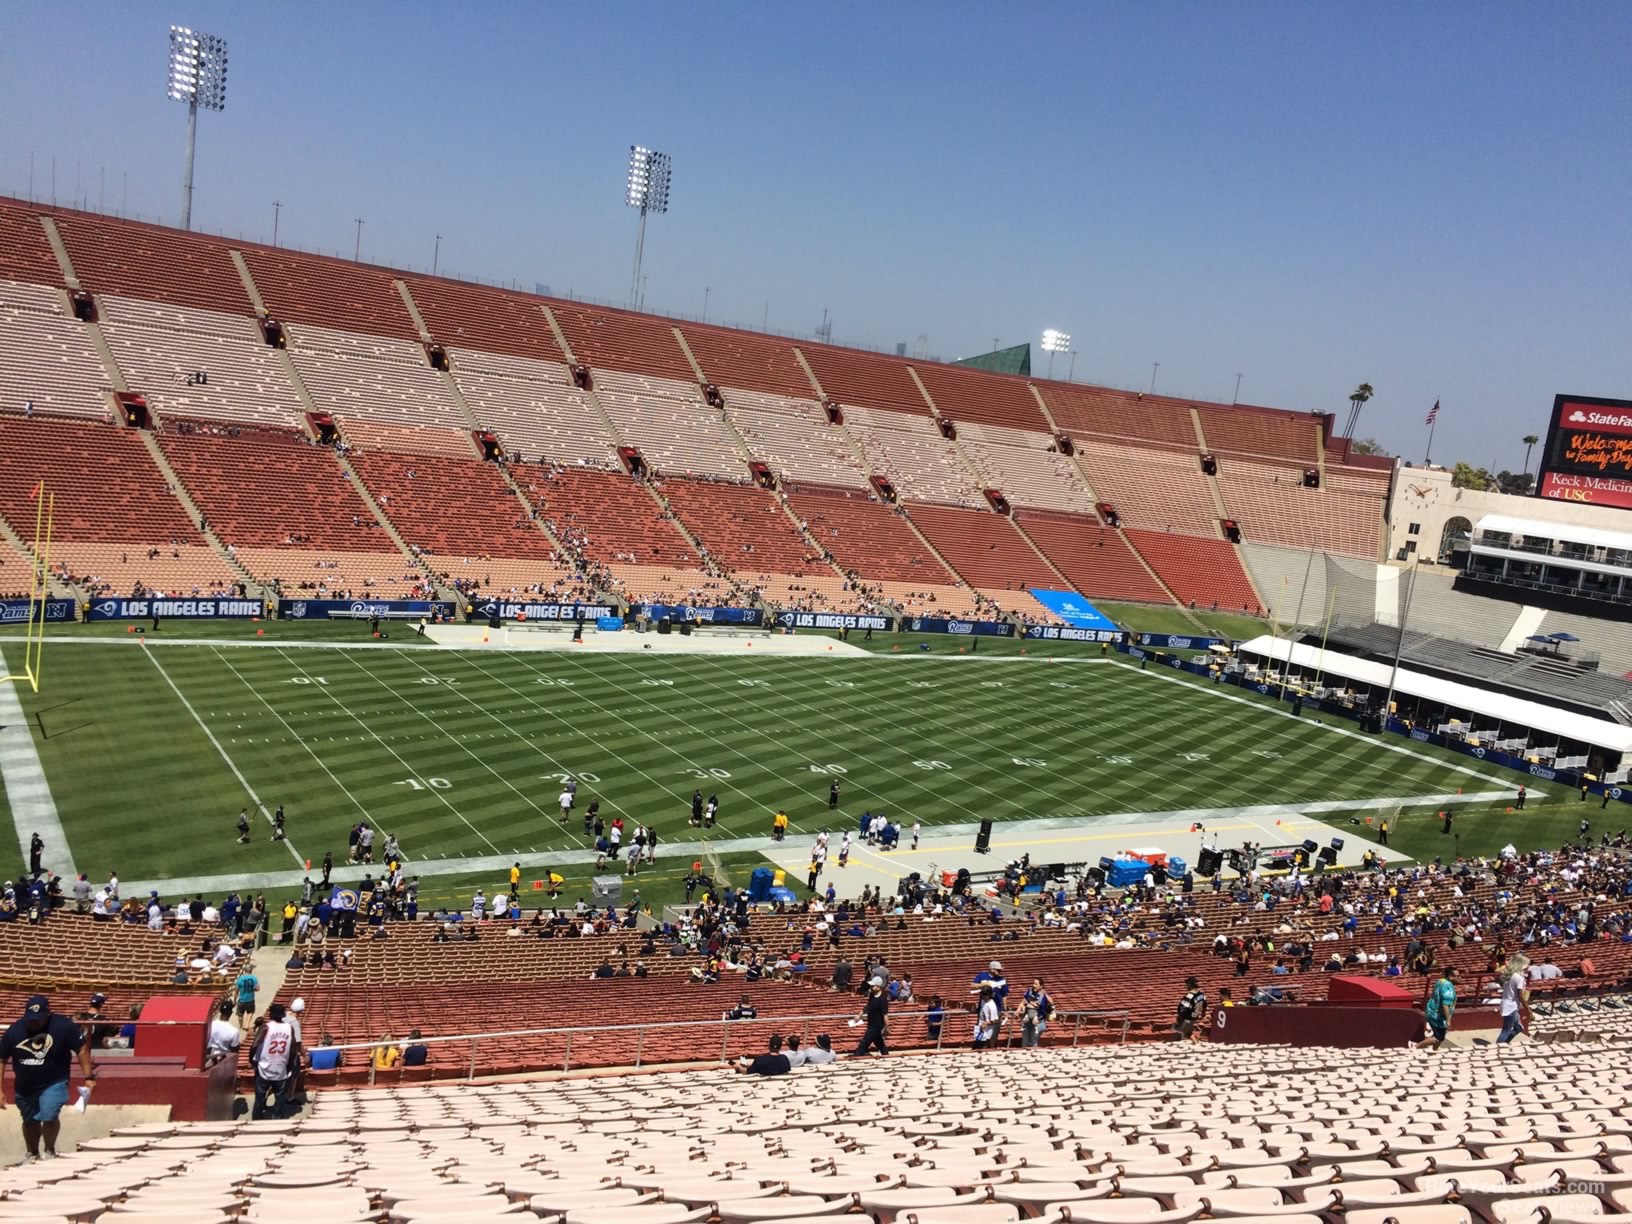 section 209b, row 18 seat view  - los angeles memorial coliseum